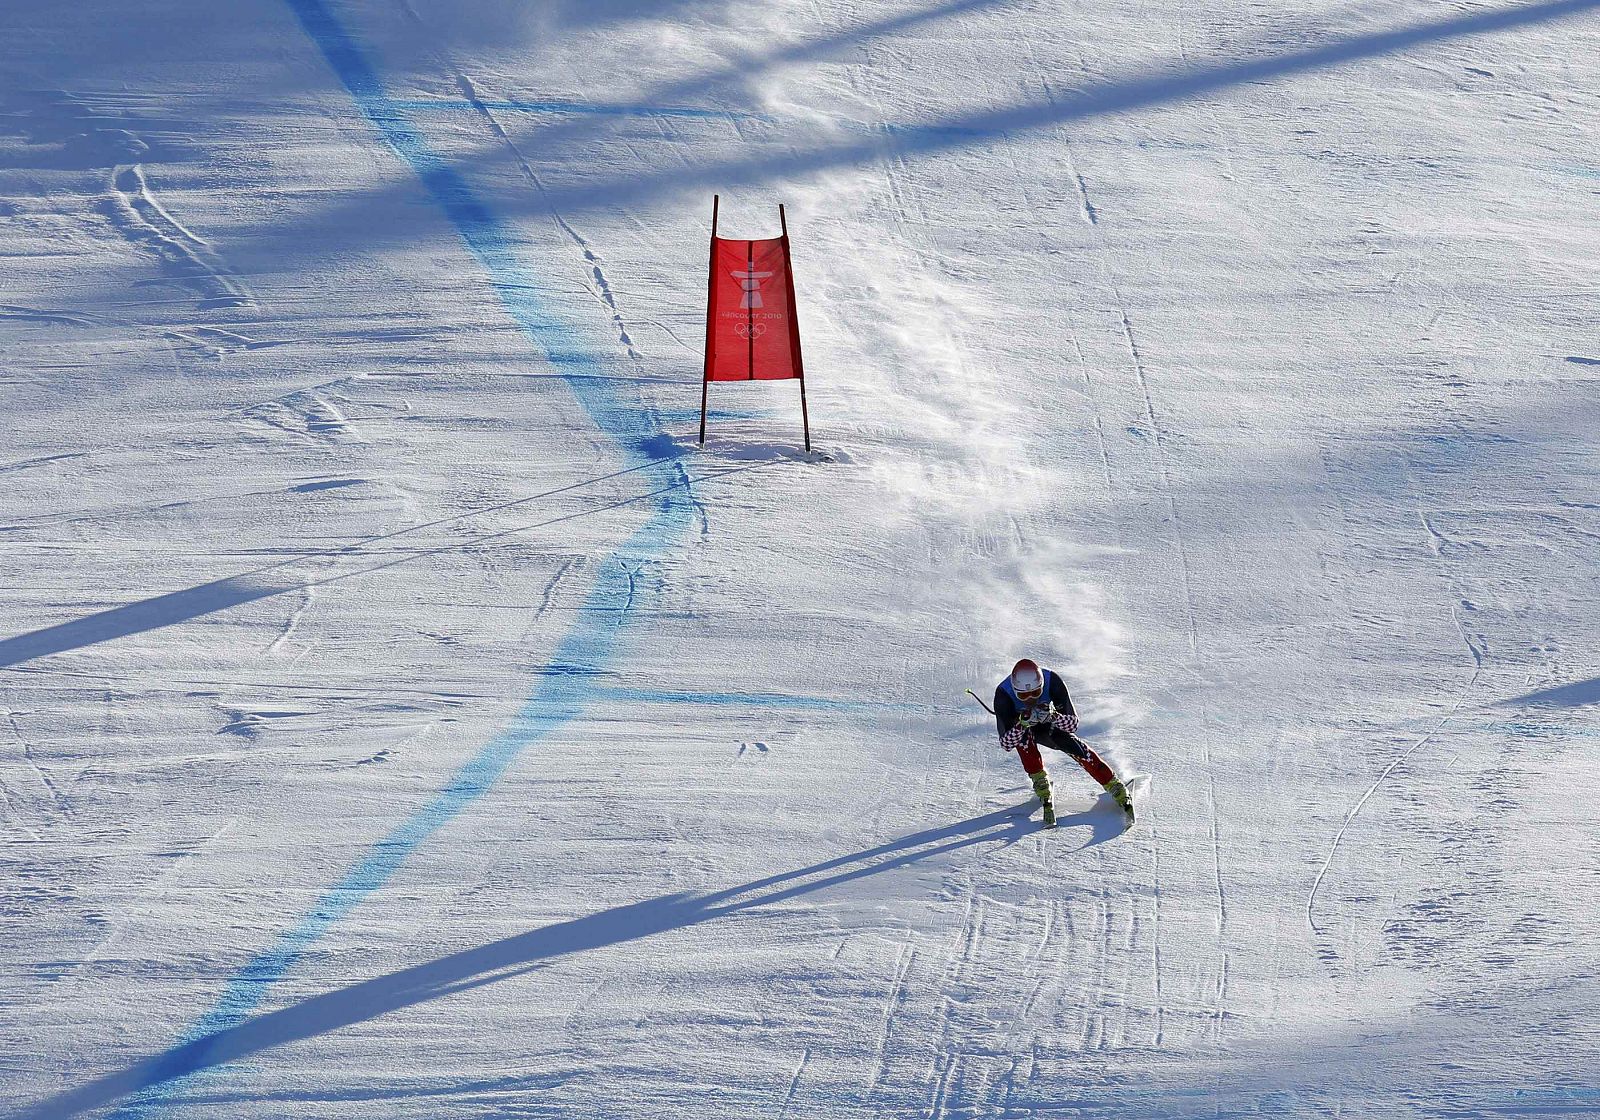 Croatia's Kostelic speeds down the course during the Downhill run of the men's Alpine Skiing Super Combined event at the Vancouver 2010 Winter Olympics in Whistler